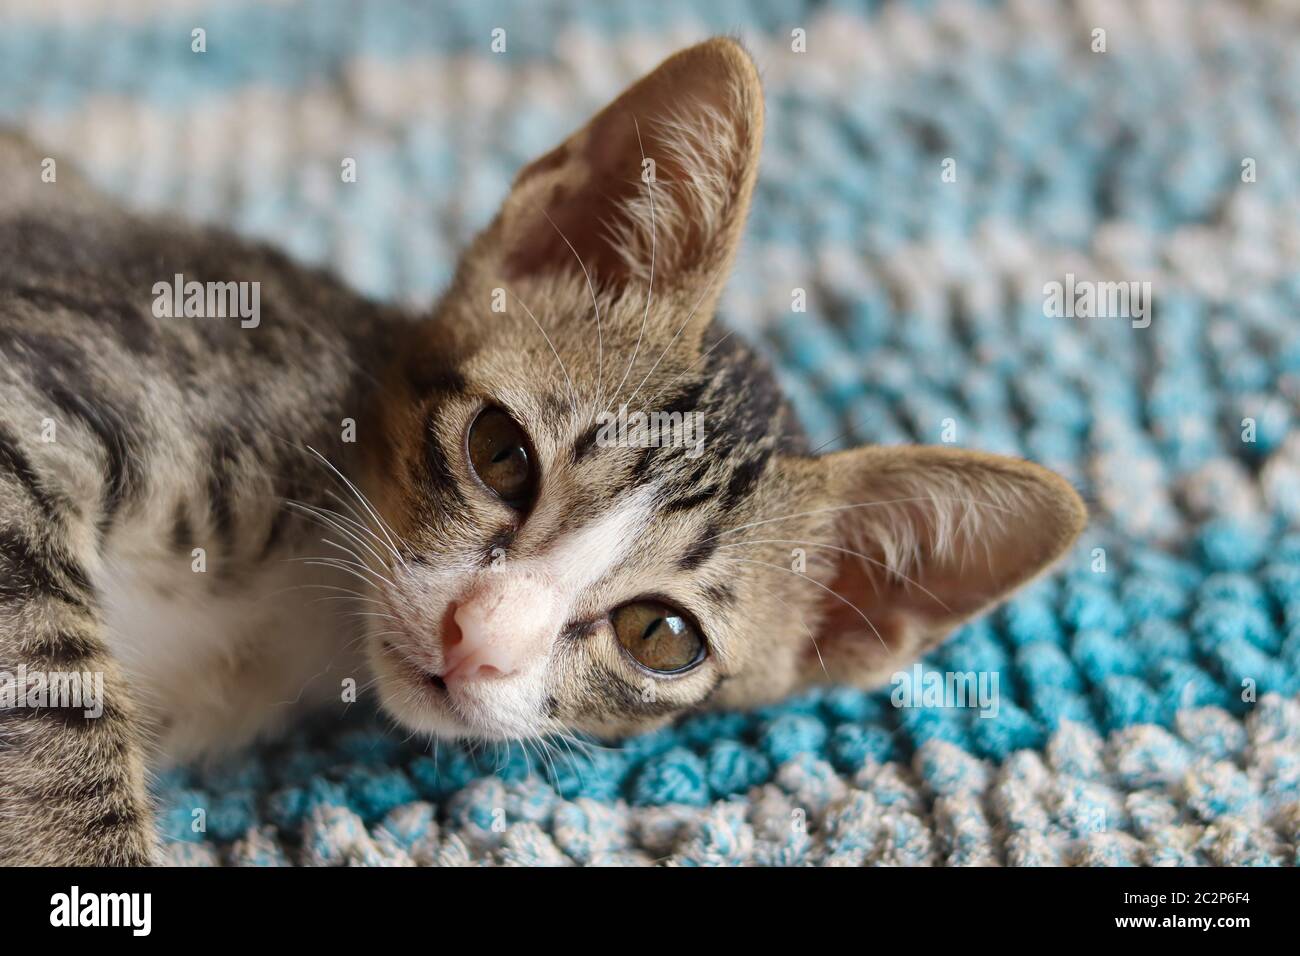 Bored cute cat showing the concept of depression and coping with home quarantine during the covid-19 pandemic Stock Photo